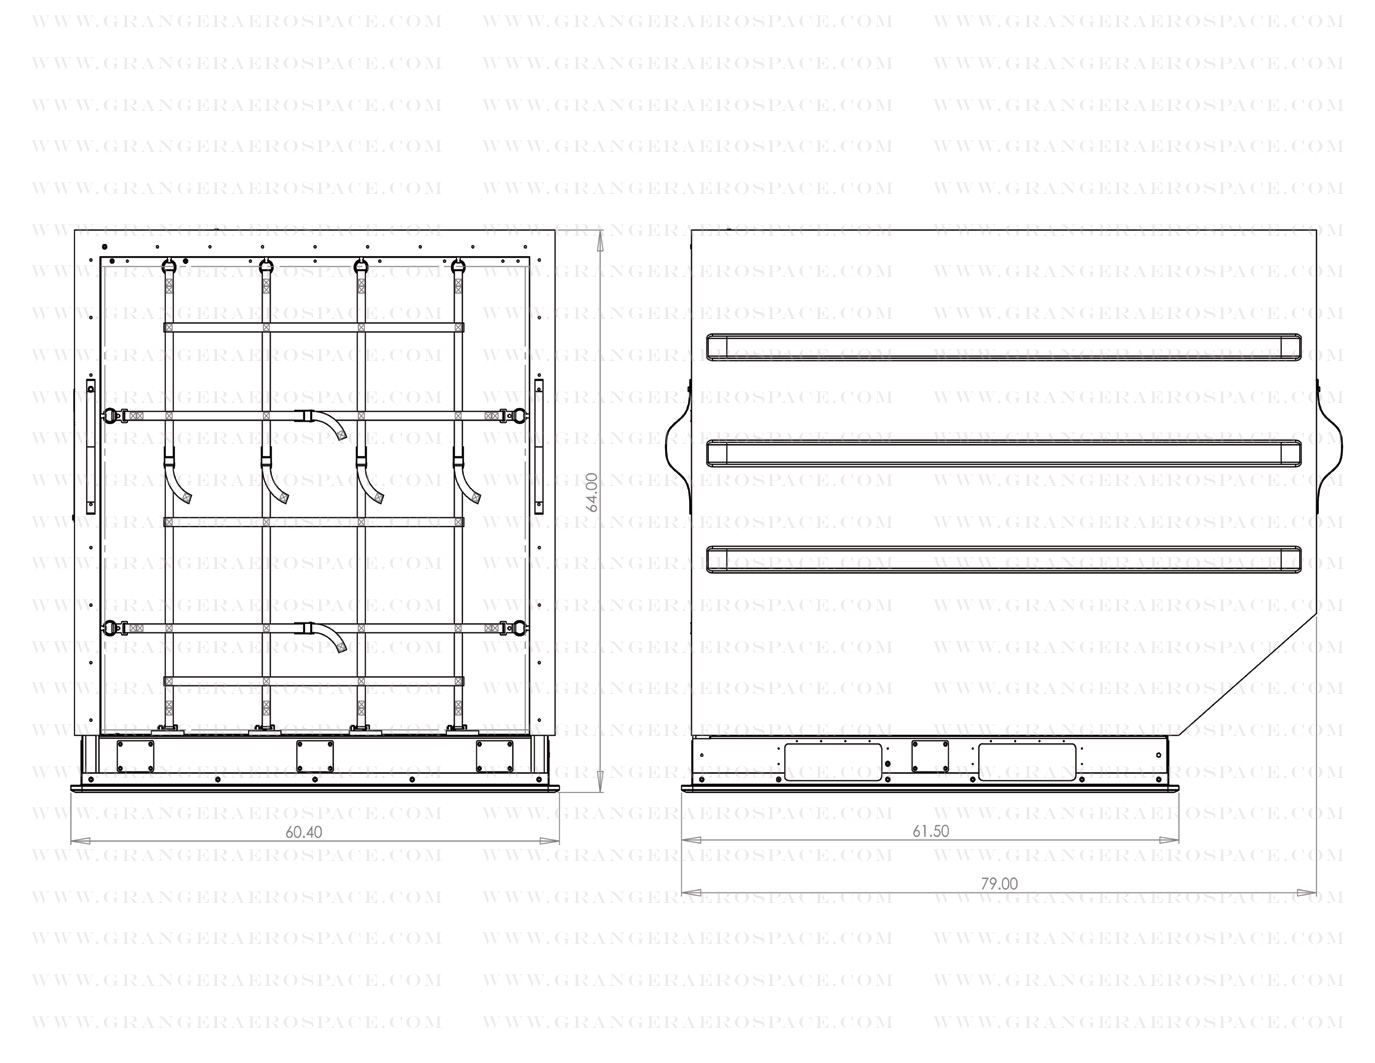 LD 3 Dimensions, LD 3 Air Cargo Container Dimensions, AKN dimensions